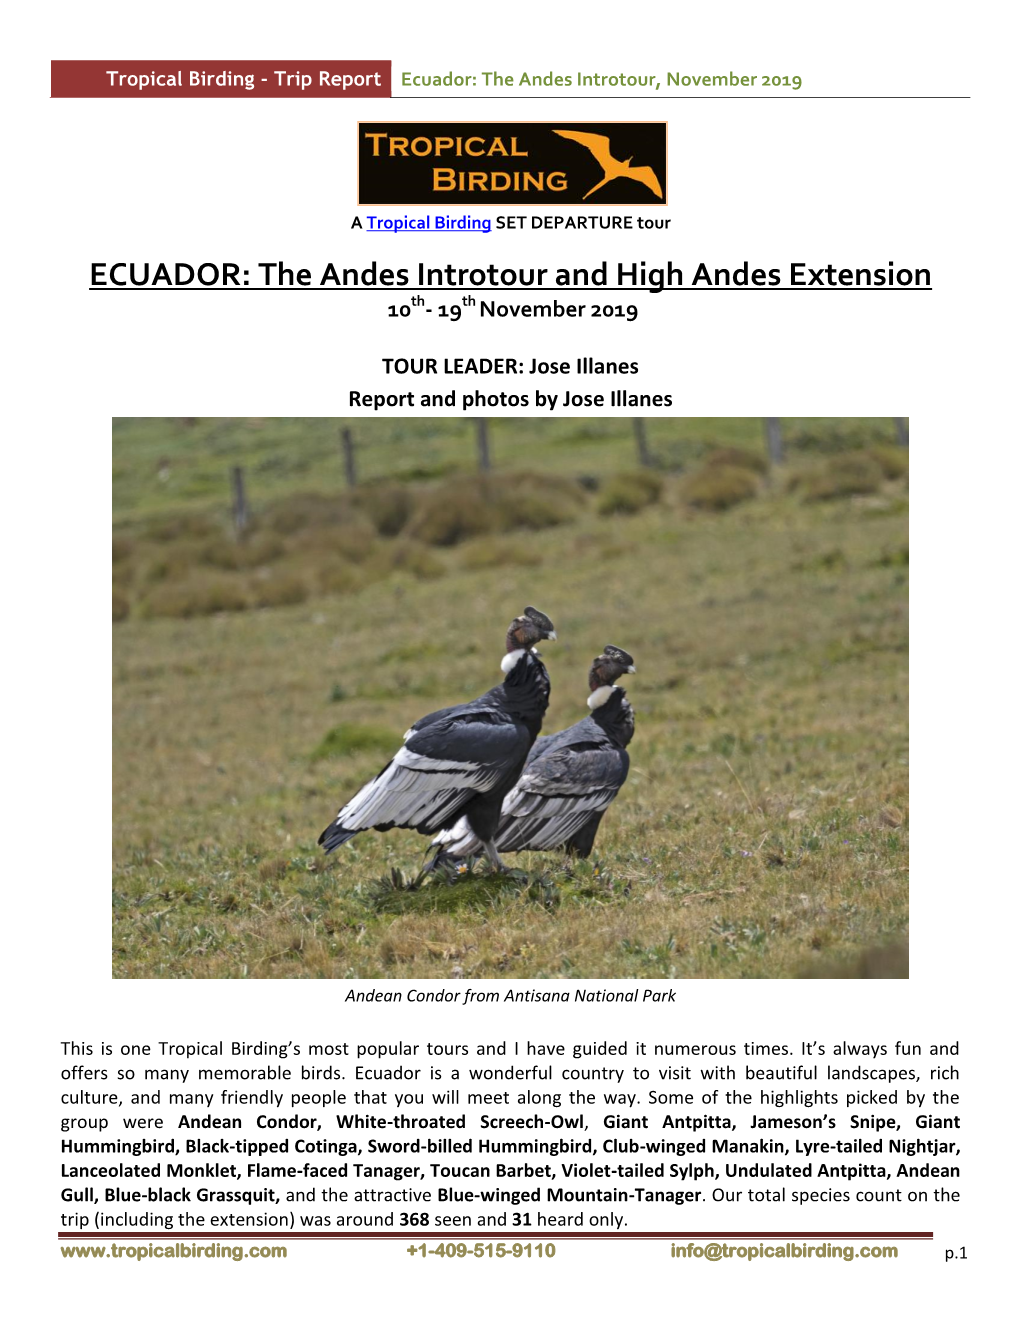 ECUADOR: the Andes Introtour and High Andes Extension 10Th- 19Th November 2019